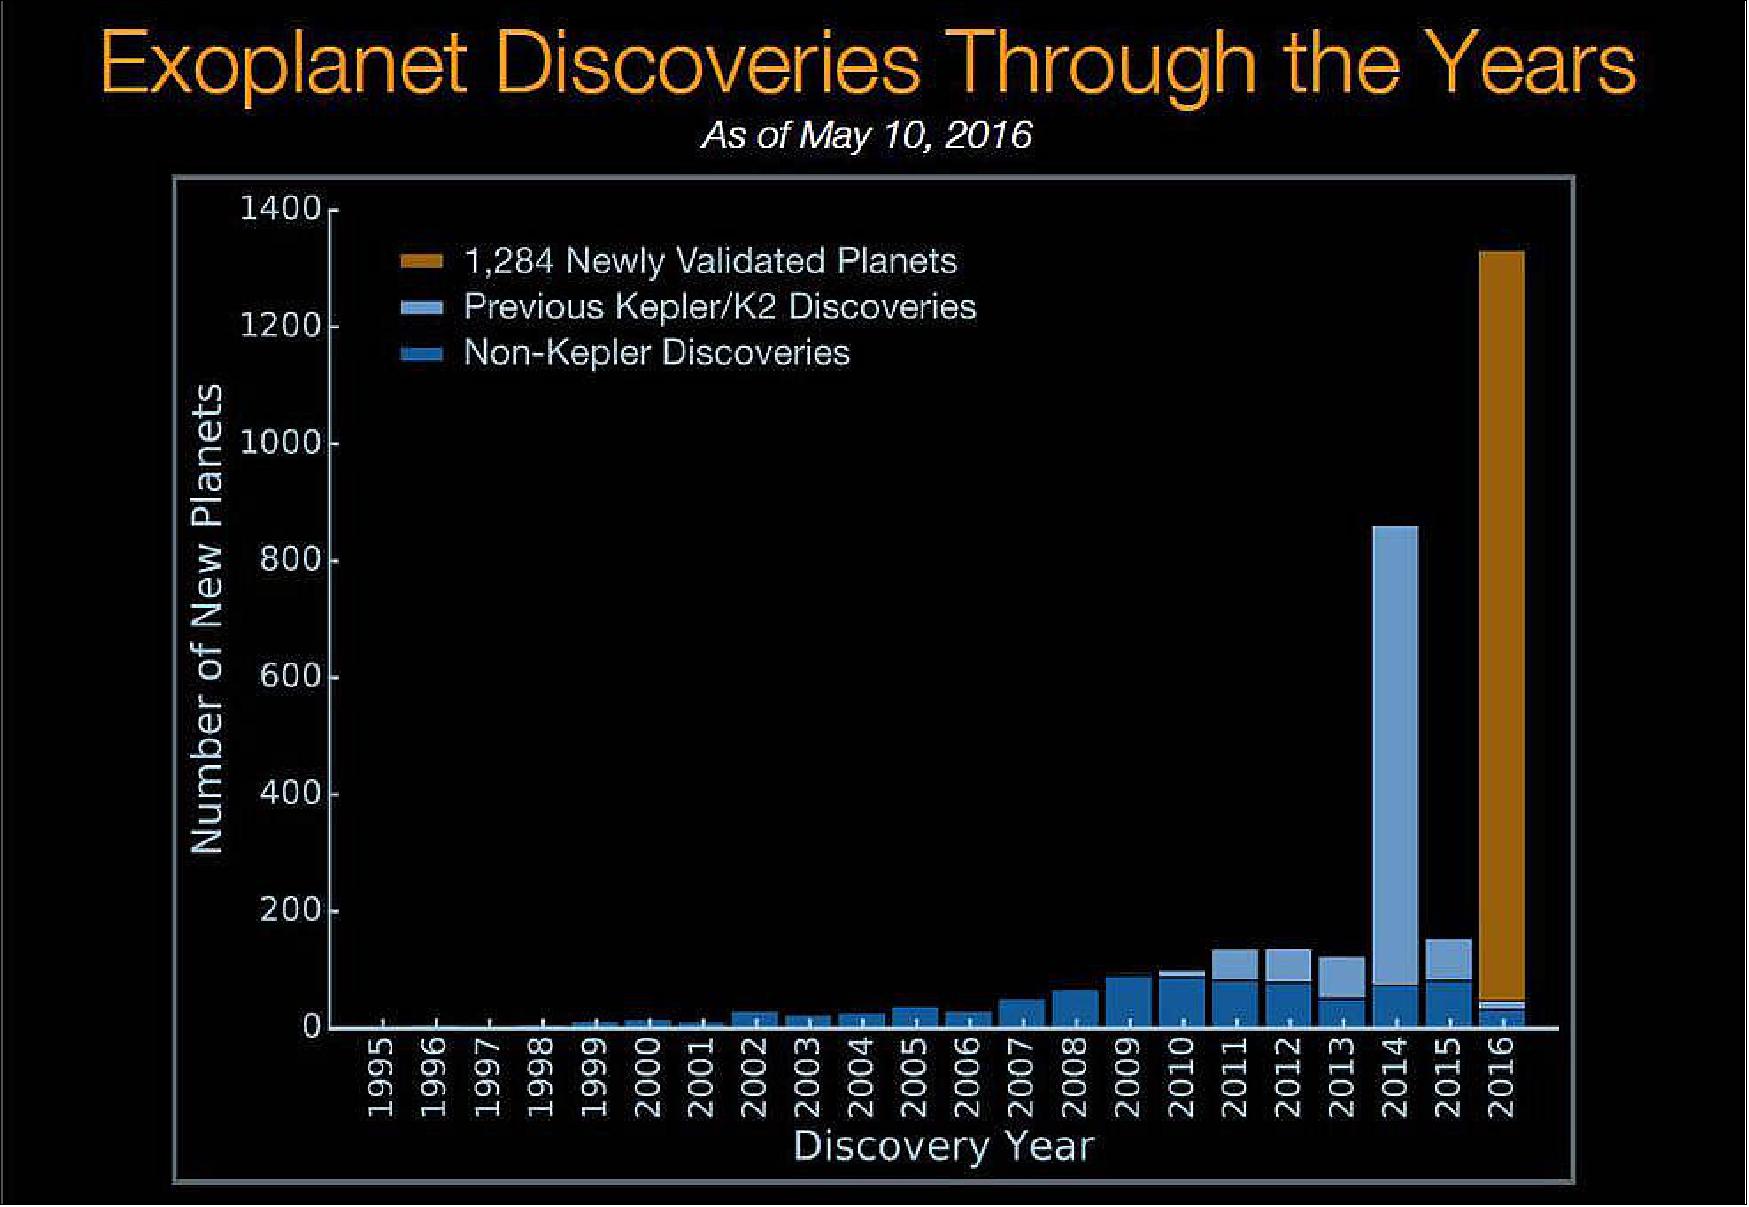 Figure 46: The histogram shows the number of planet discoveries by year for more than the past two decades of the exoplanet search. The blue bar shows previous non-Kepler planet discoveries, the light blue bar shows previous Kepler planet discoveries, the orange bar displays the 1,284 new validated planets (image credit: NASA Ames / W. Stenzel; Princeton University / T. Morton) 82)